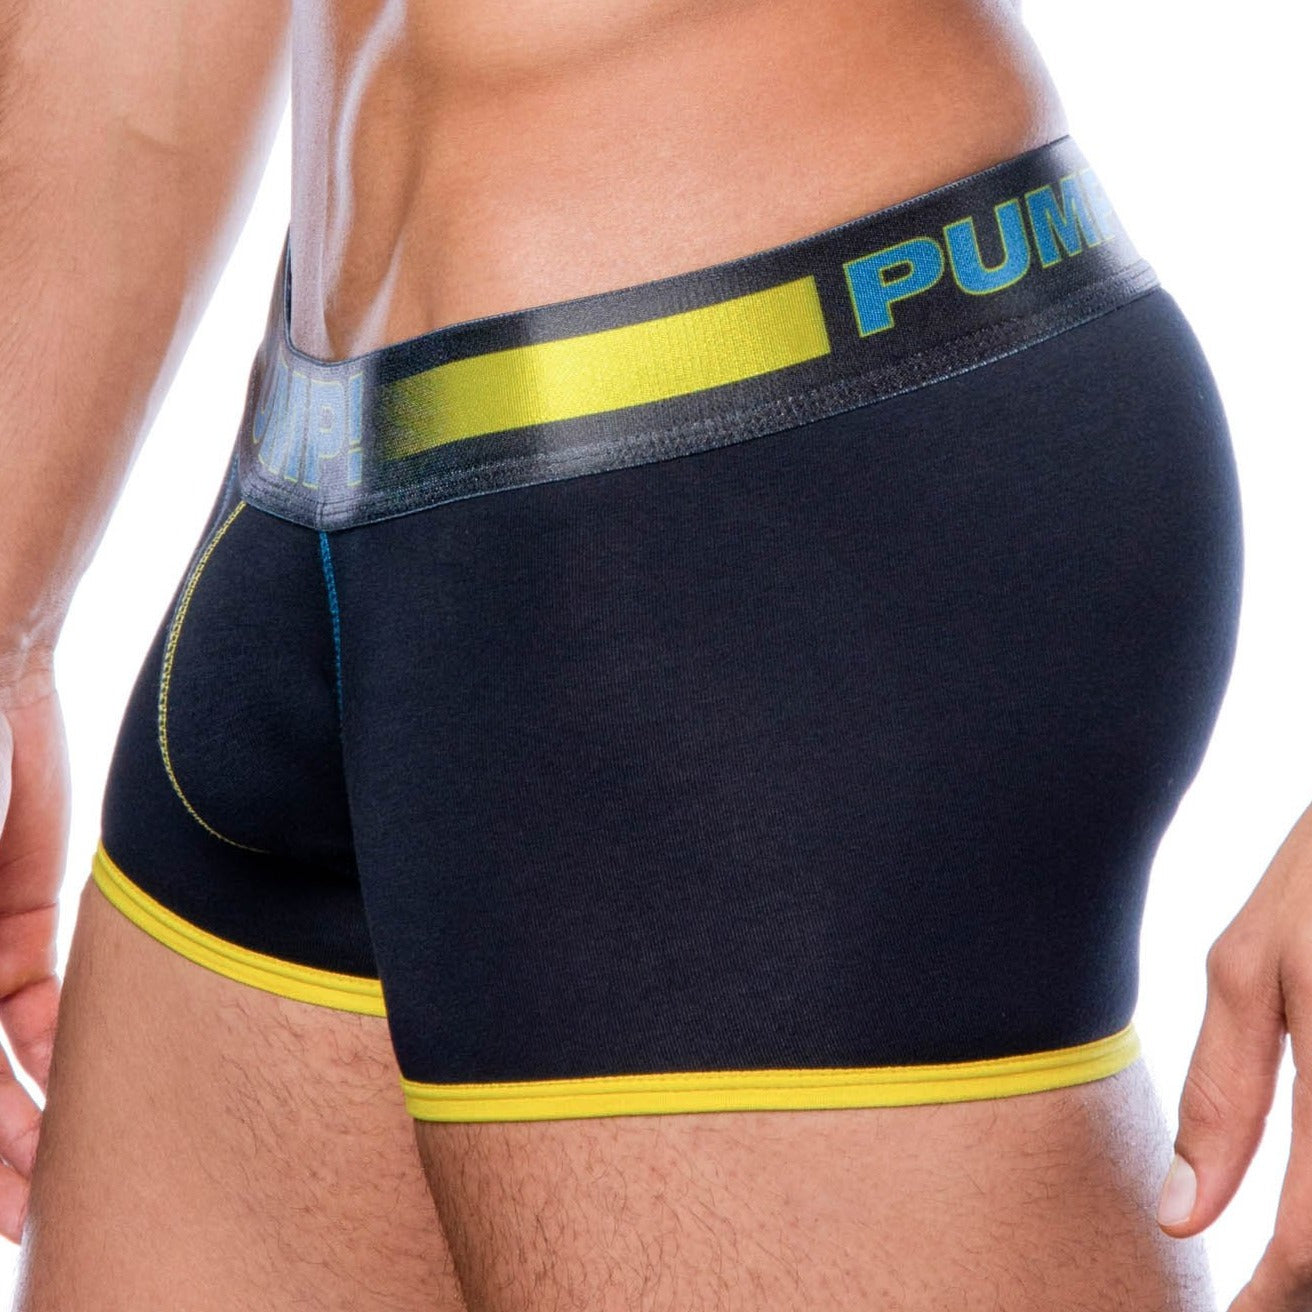 Play Boxer - Yellow Side by PUMP! Underwear at Trenderwear.com